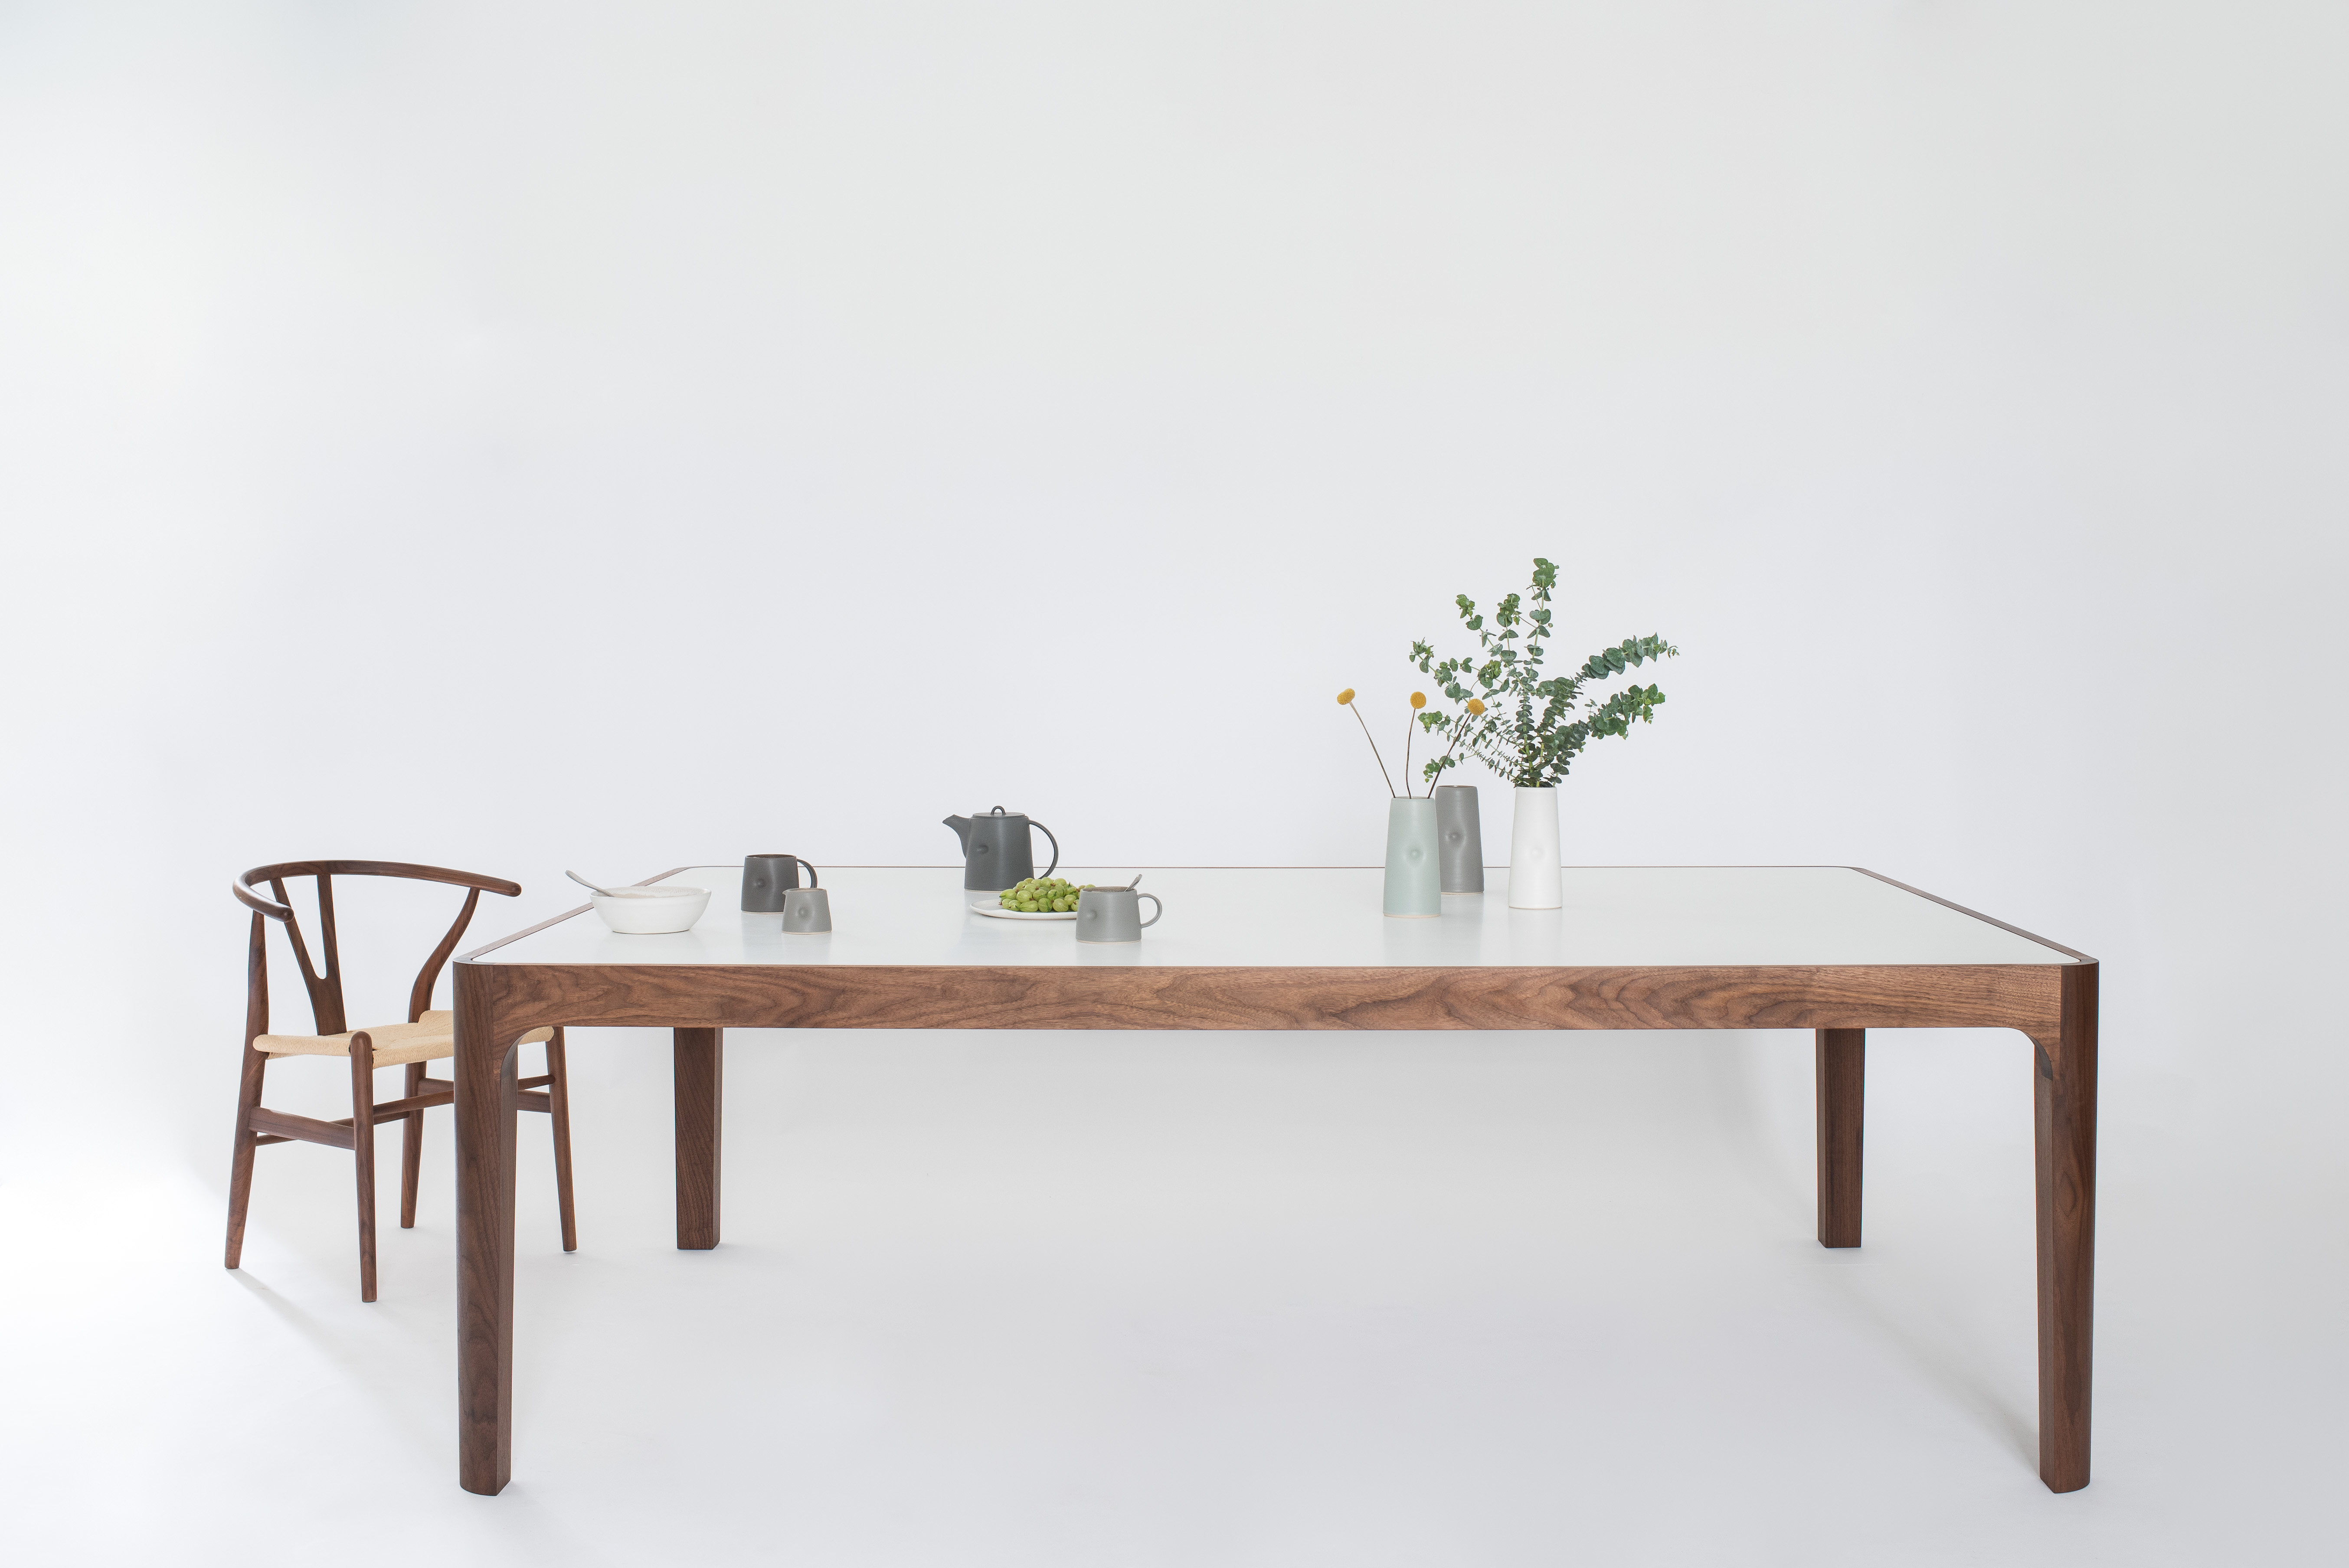 Jack Trench Bespoke Furniture | JT Curved Dining Table